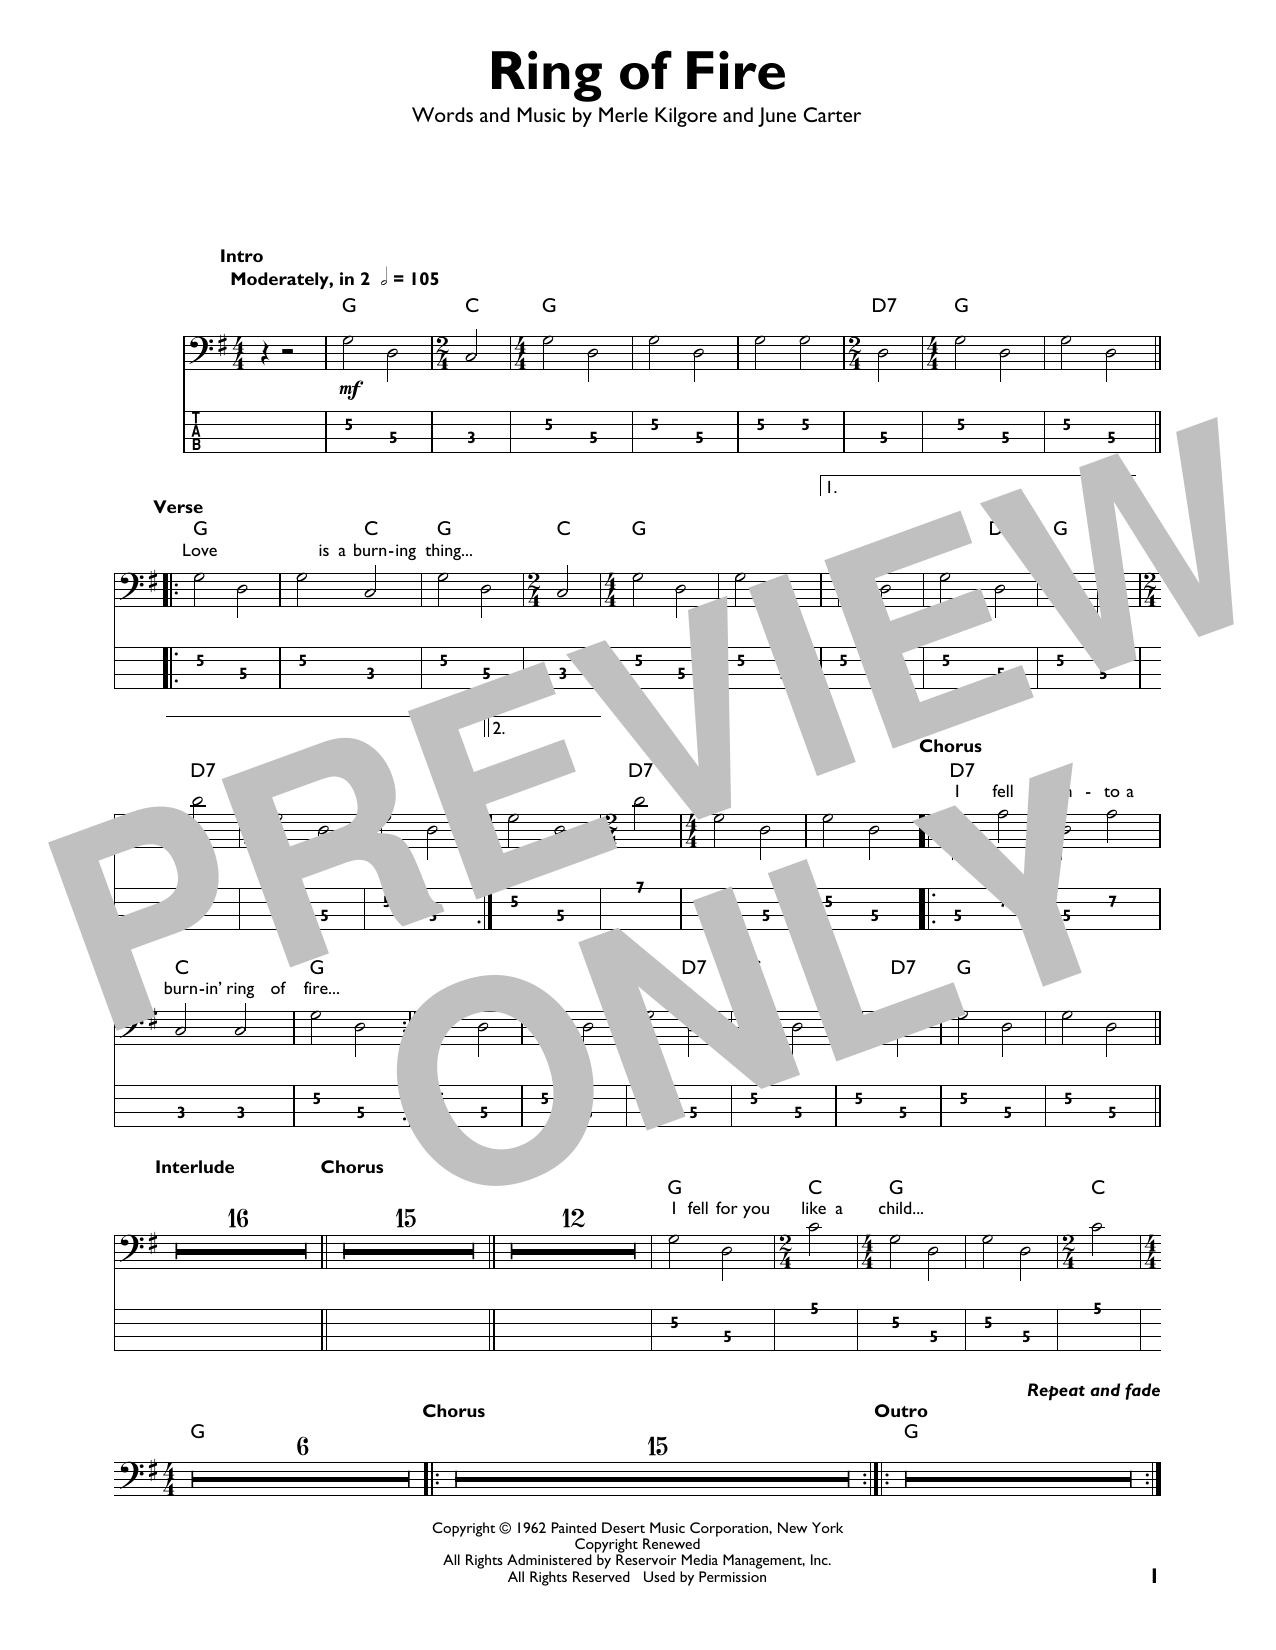 Download Johnny Cash Ring Of Fire Sheet Music